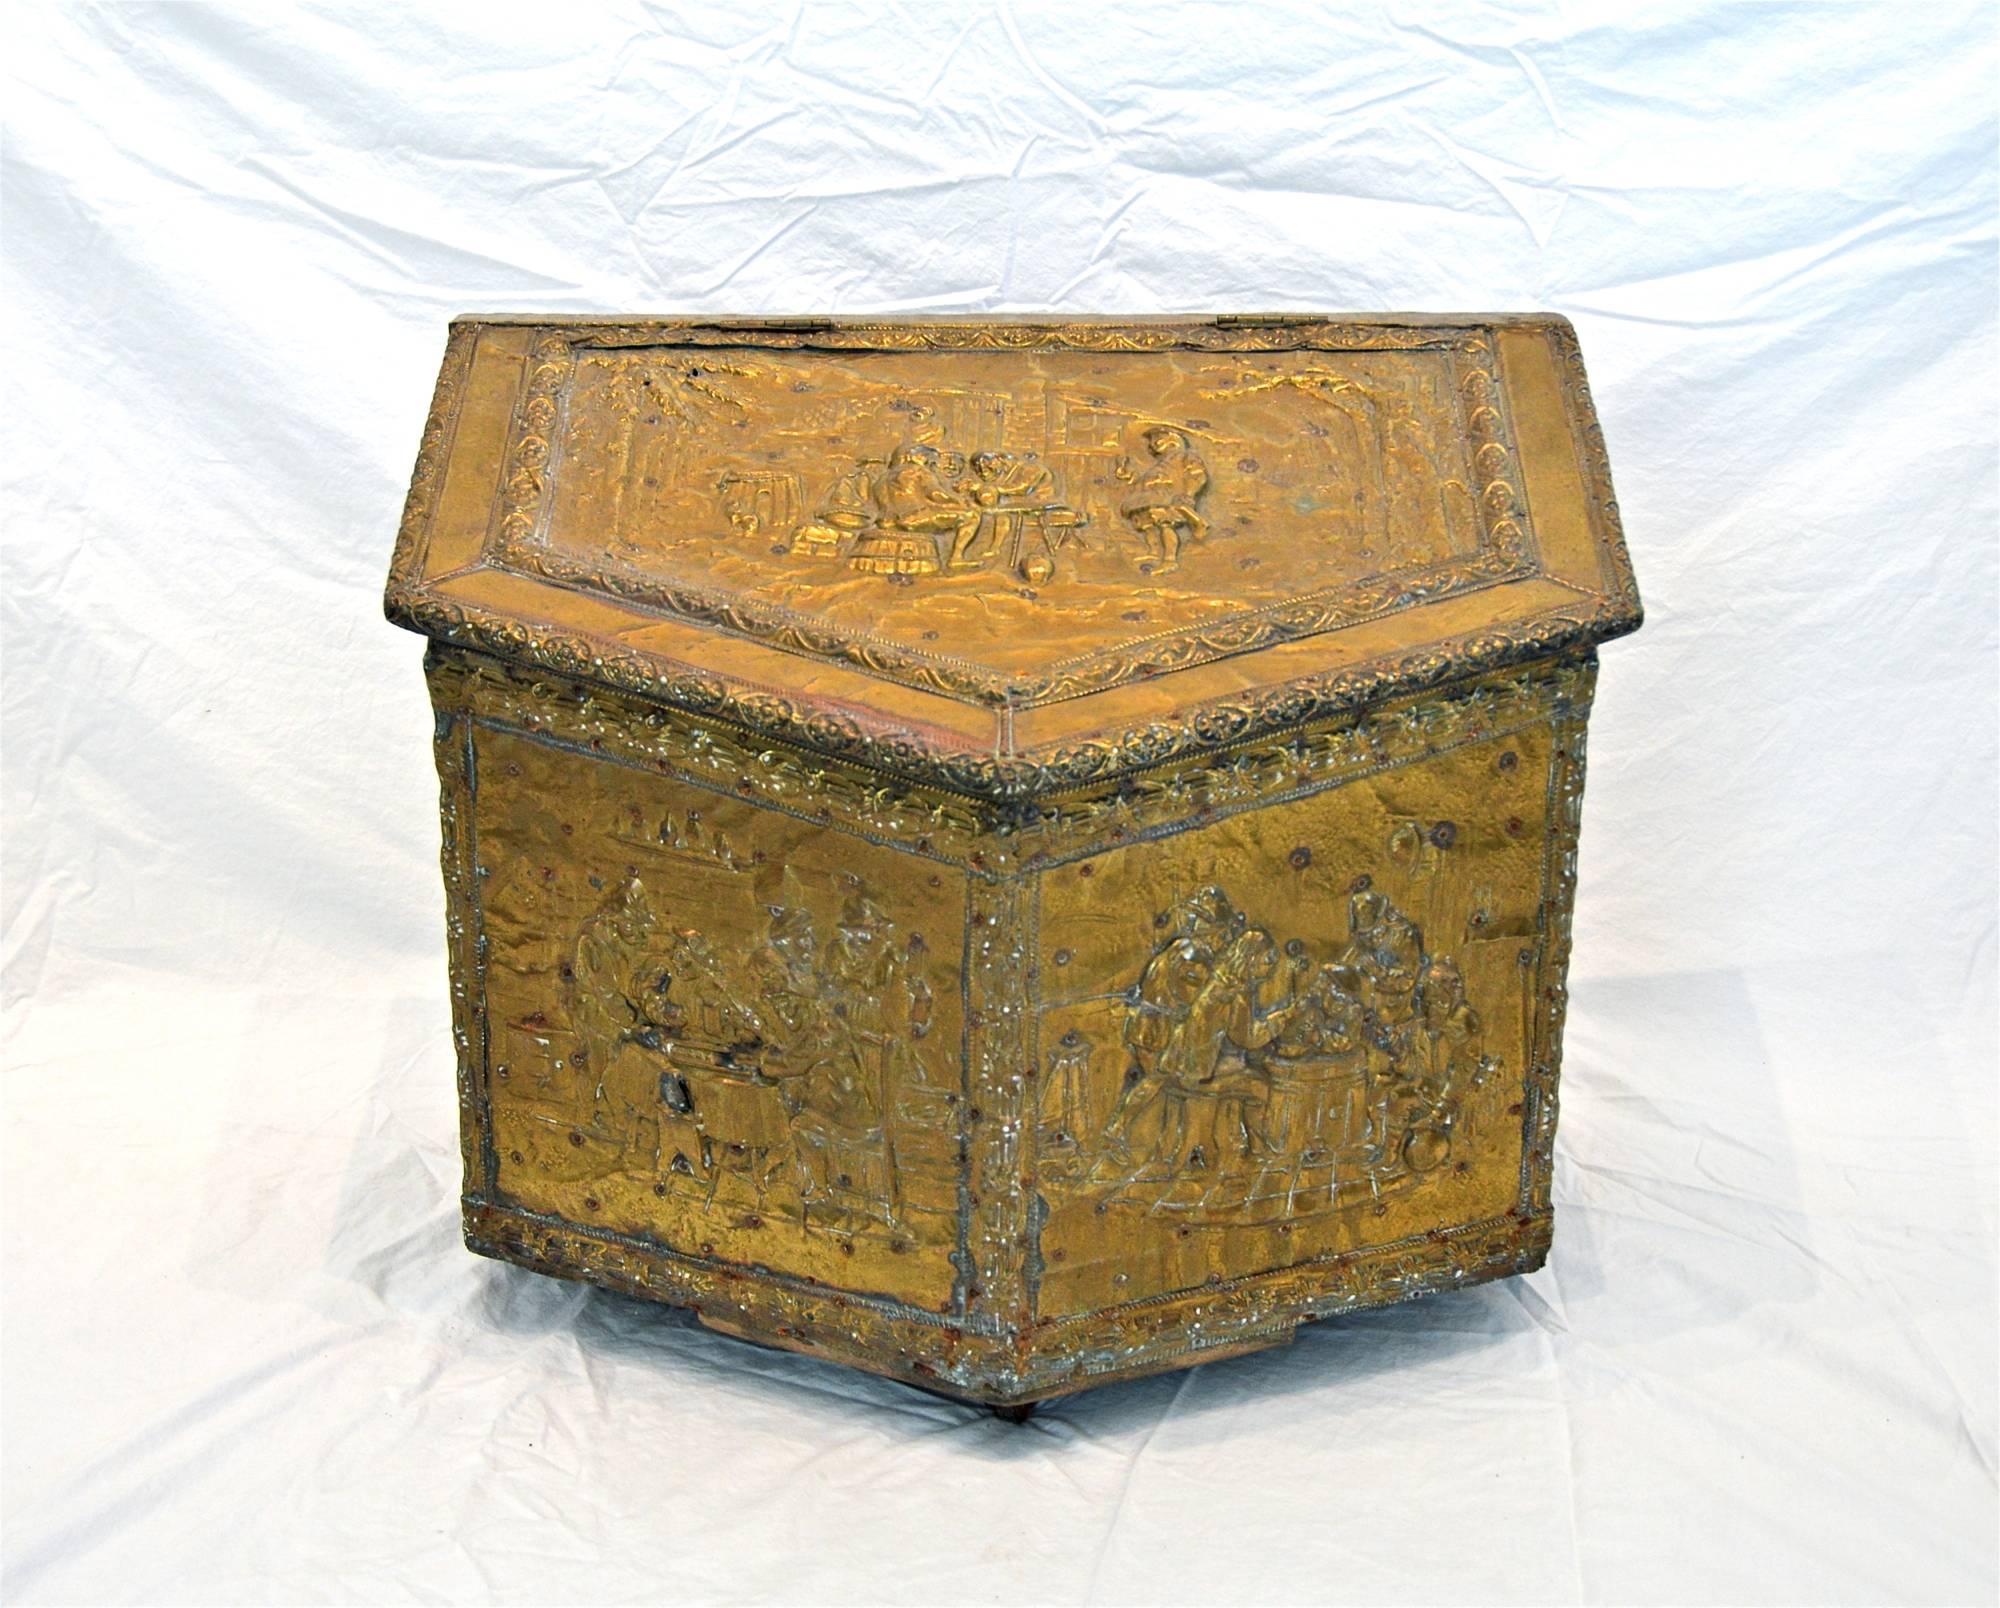 Early 20th Century firewood box of brass and pine. The box of trapezoidal shape, is crafted of repoussé brass sheet and depicts various groups of jovial men having a good time. The hinged top is adorned with a wonderful egg and dart trim moulding.